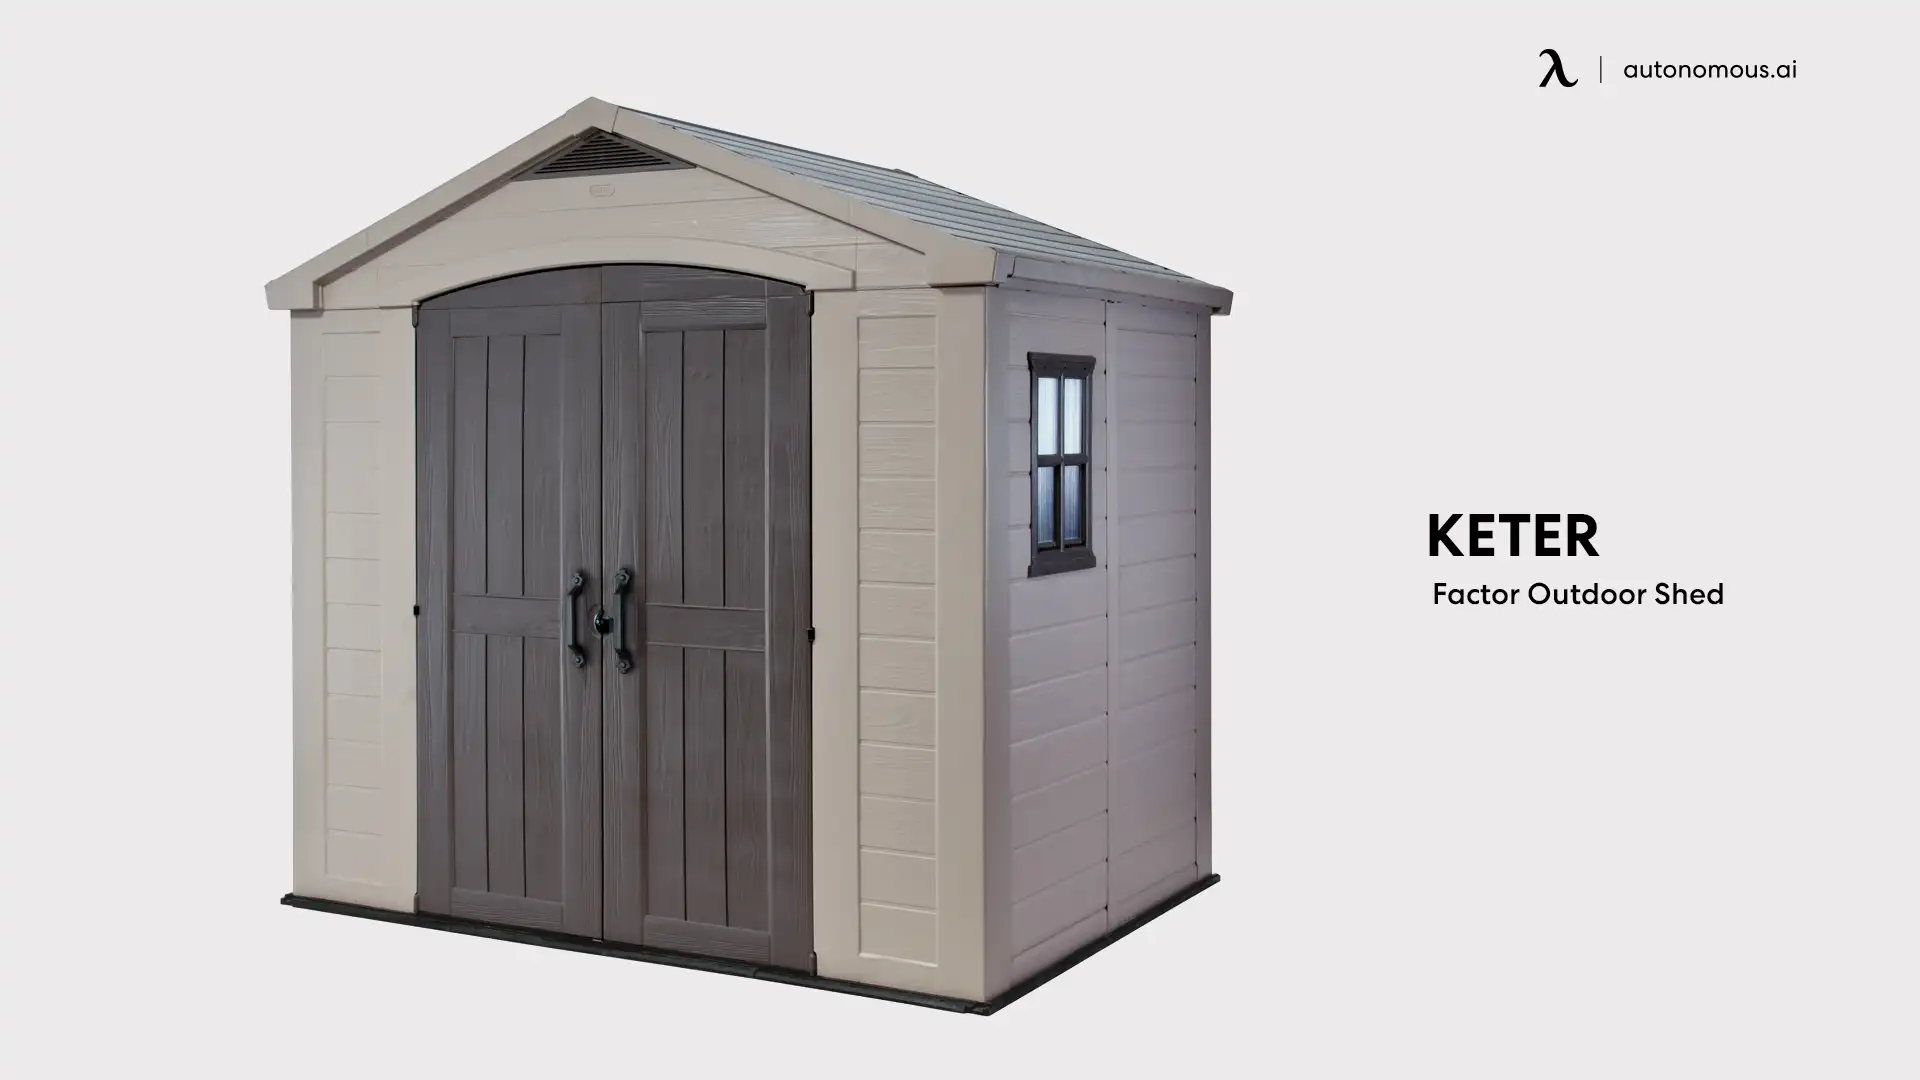 Keter Factor Outdoor Shed